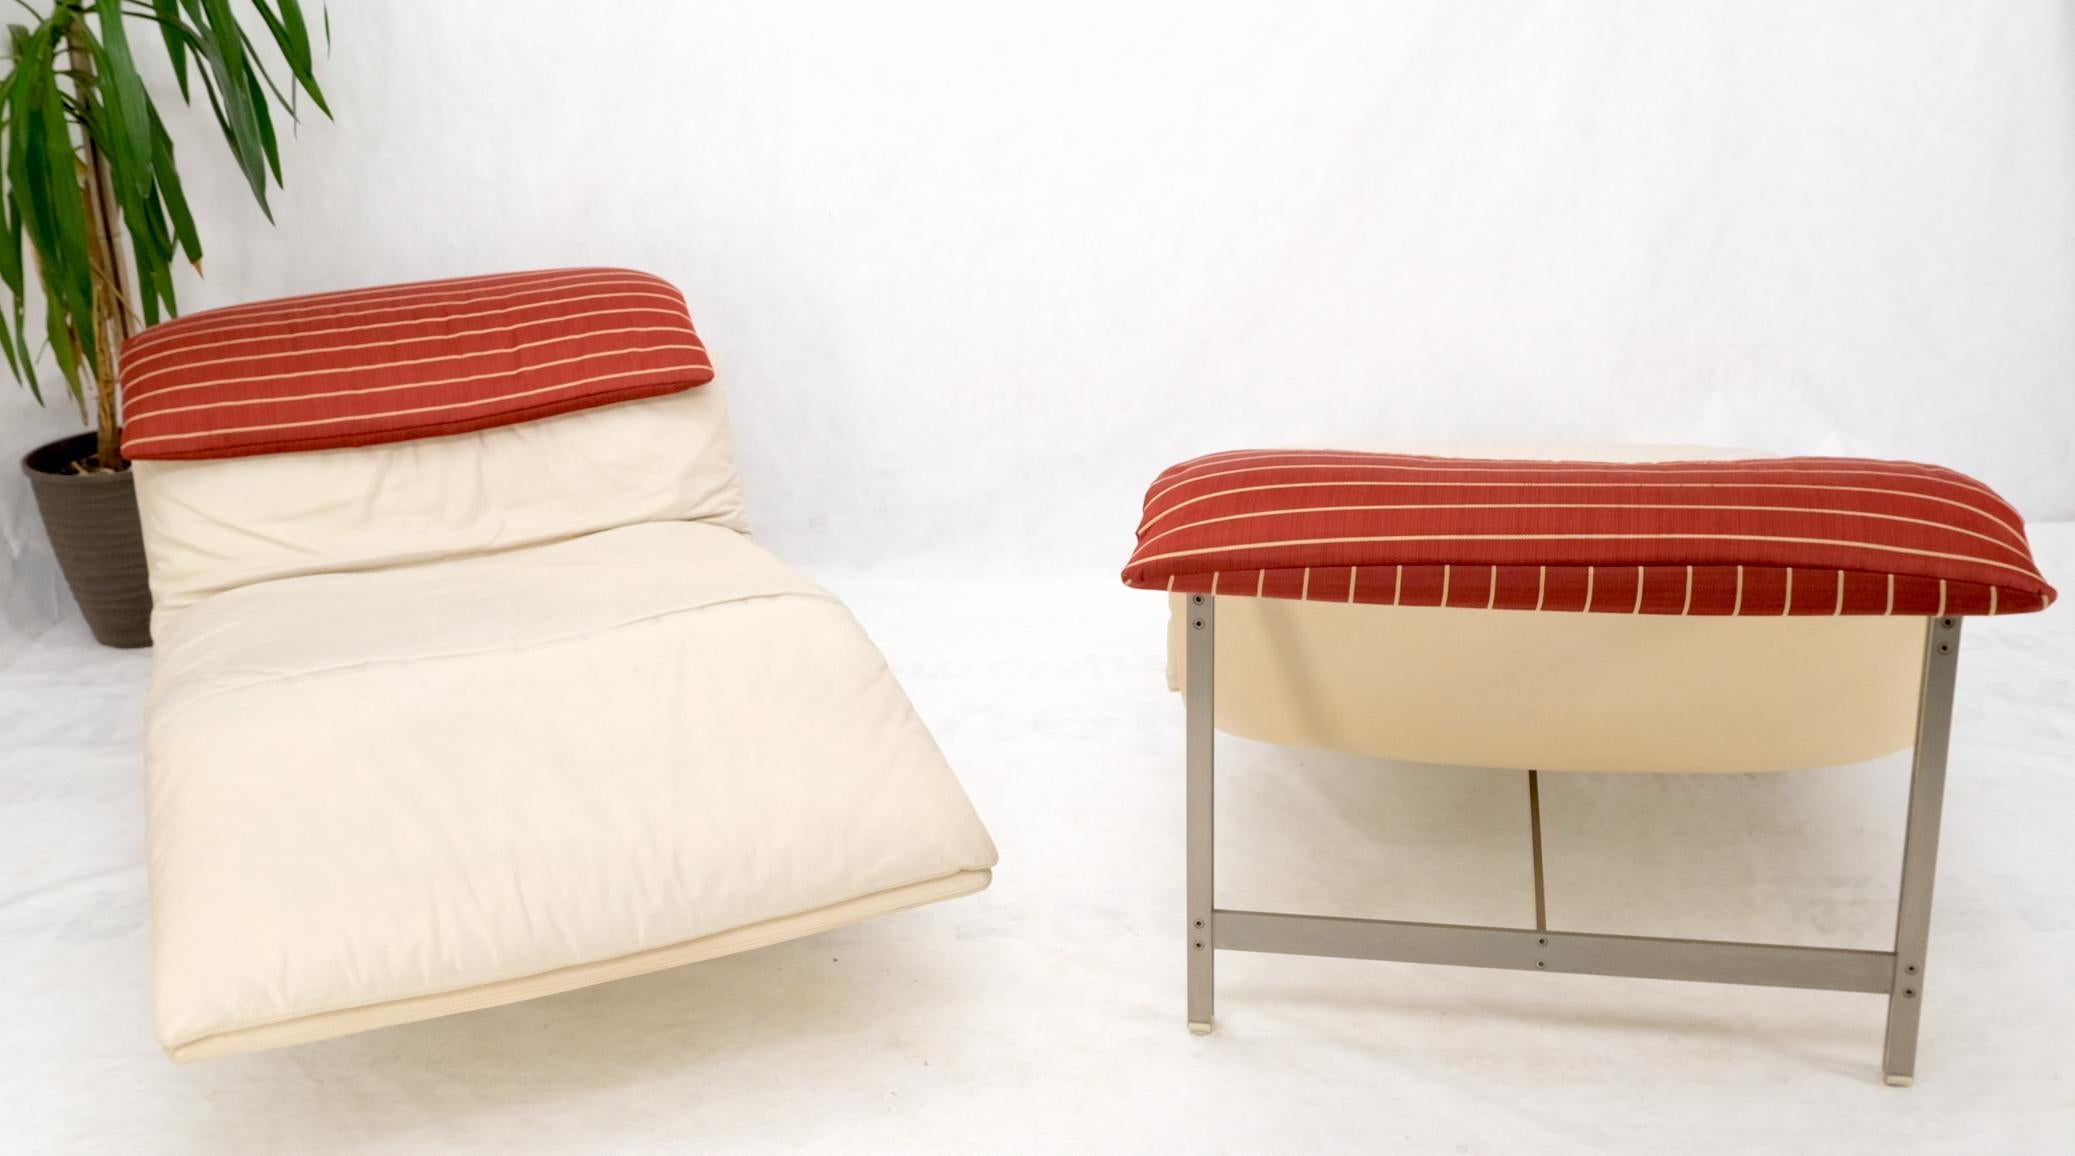 Pair of Sapority Italian Mid Century Modern Leather Chaise Lounges For Sale 7